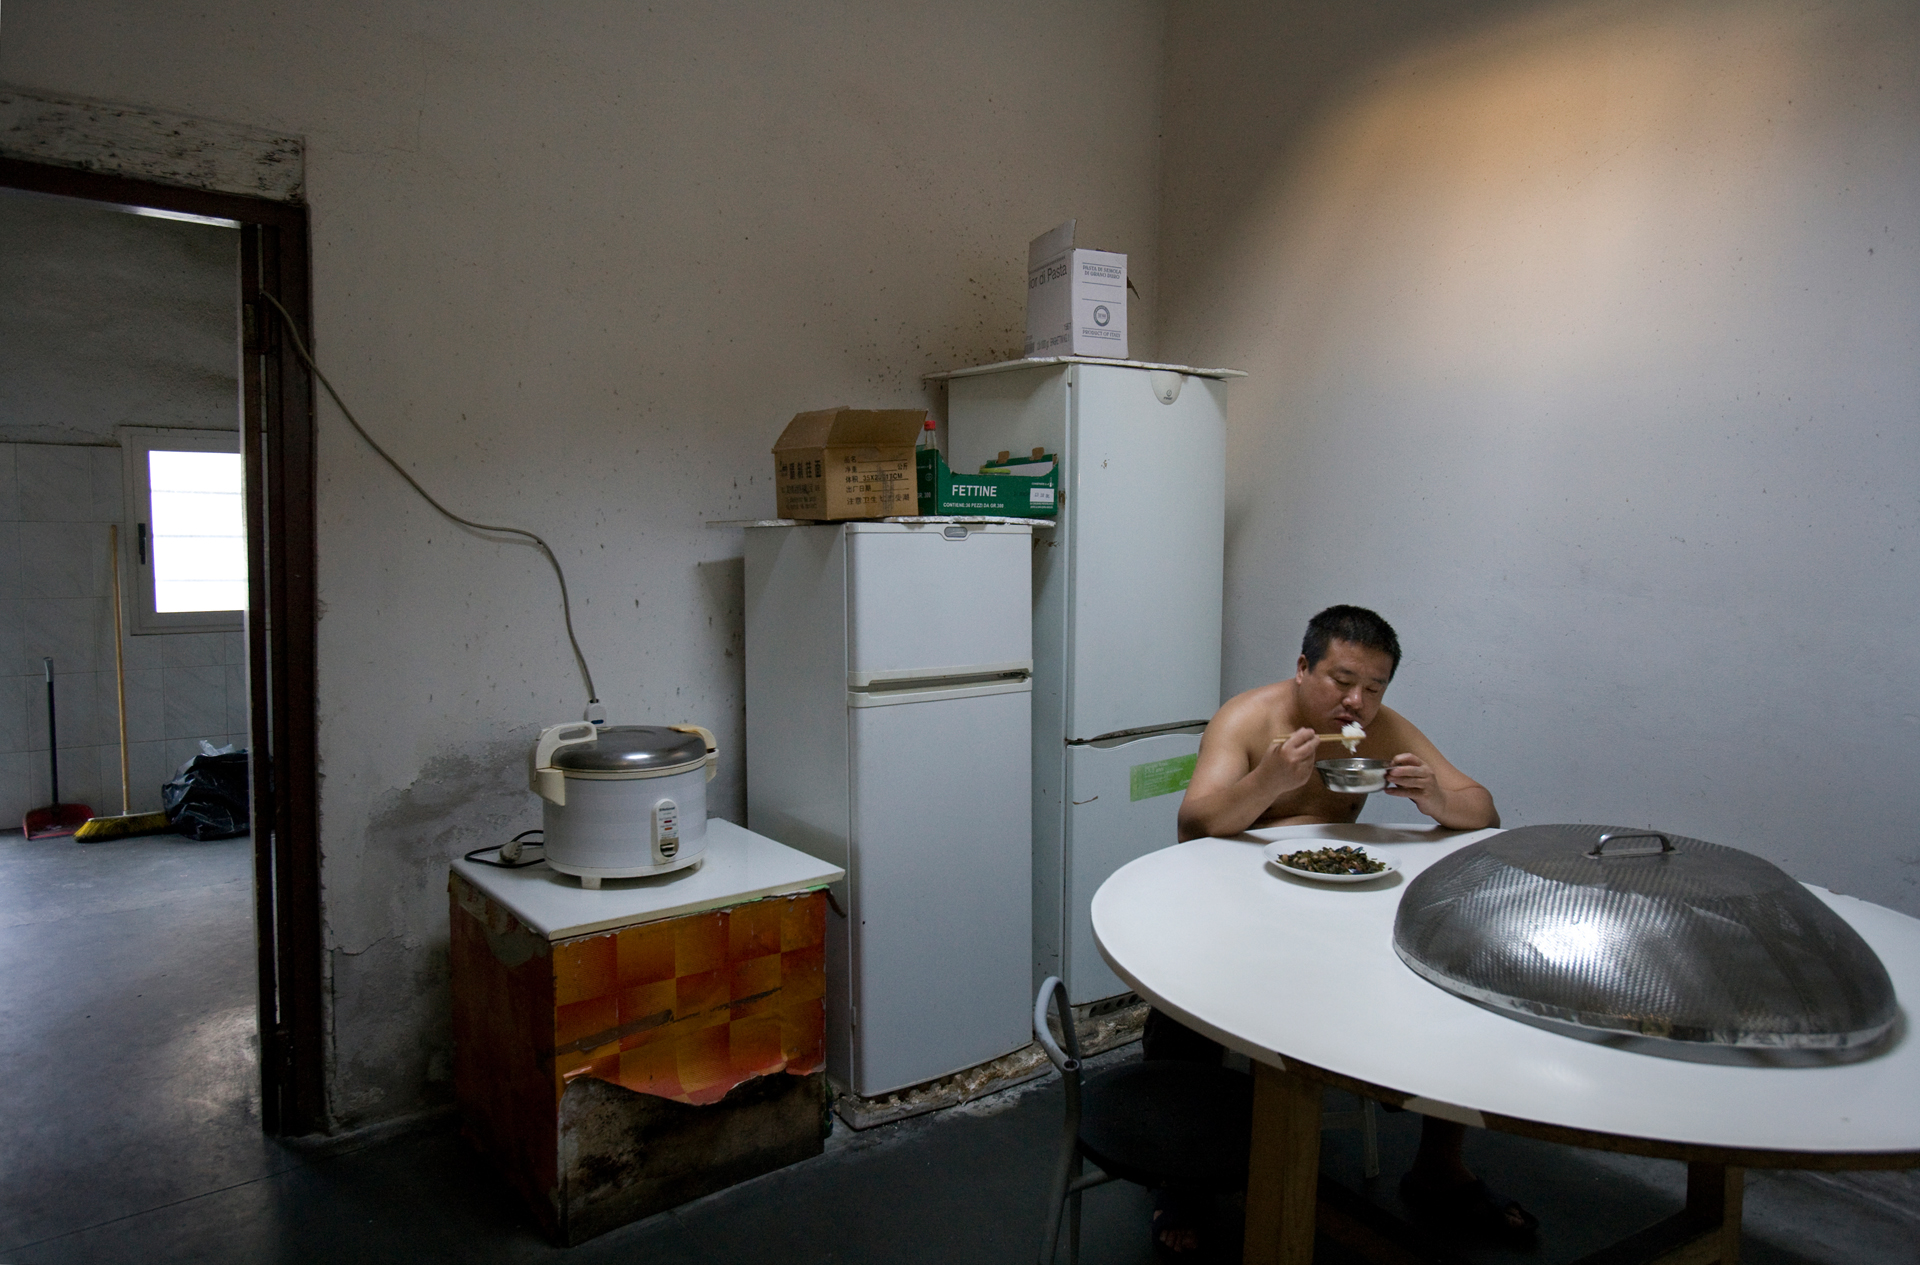  A Chinese laborer takes a break from the textile factory floor for a brief meal before returning to work. 